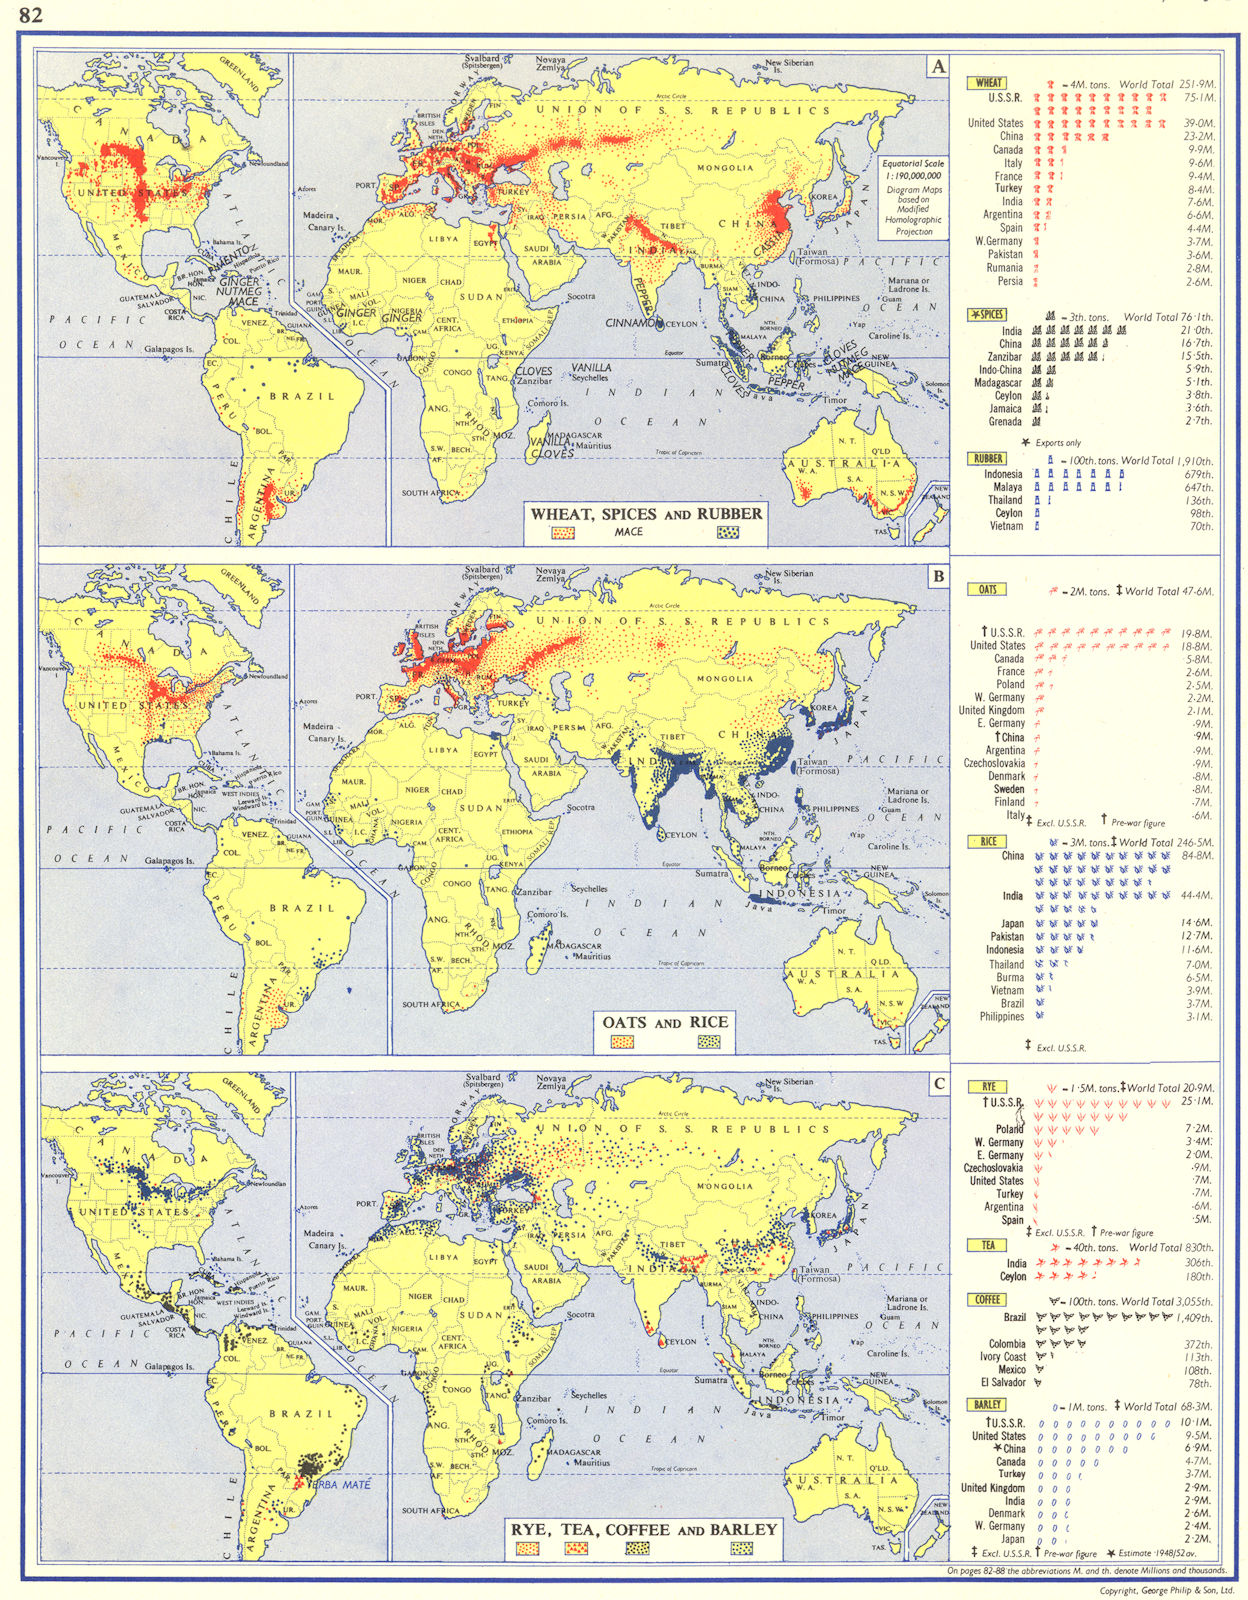 WORLD. Wheat, Spices and Rubber; Oats Rice; Rye, Tea, Coffee and Barley 1962 map